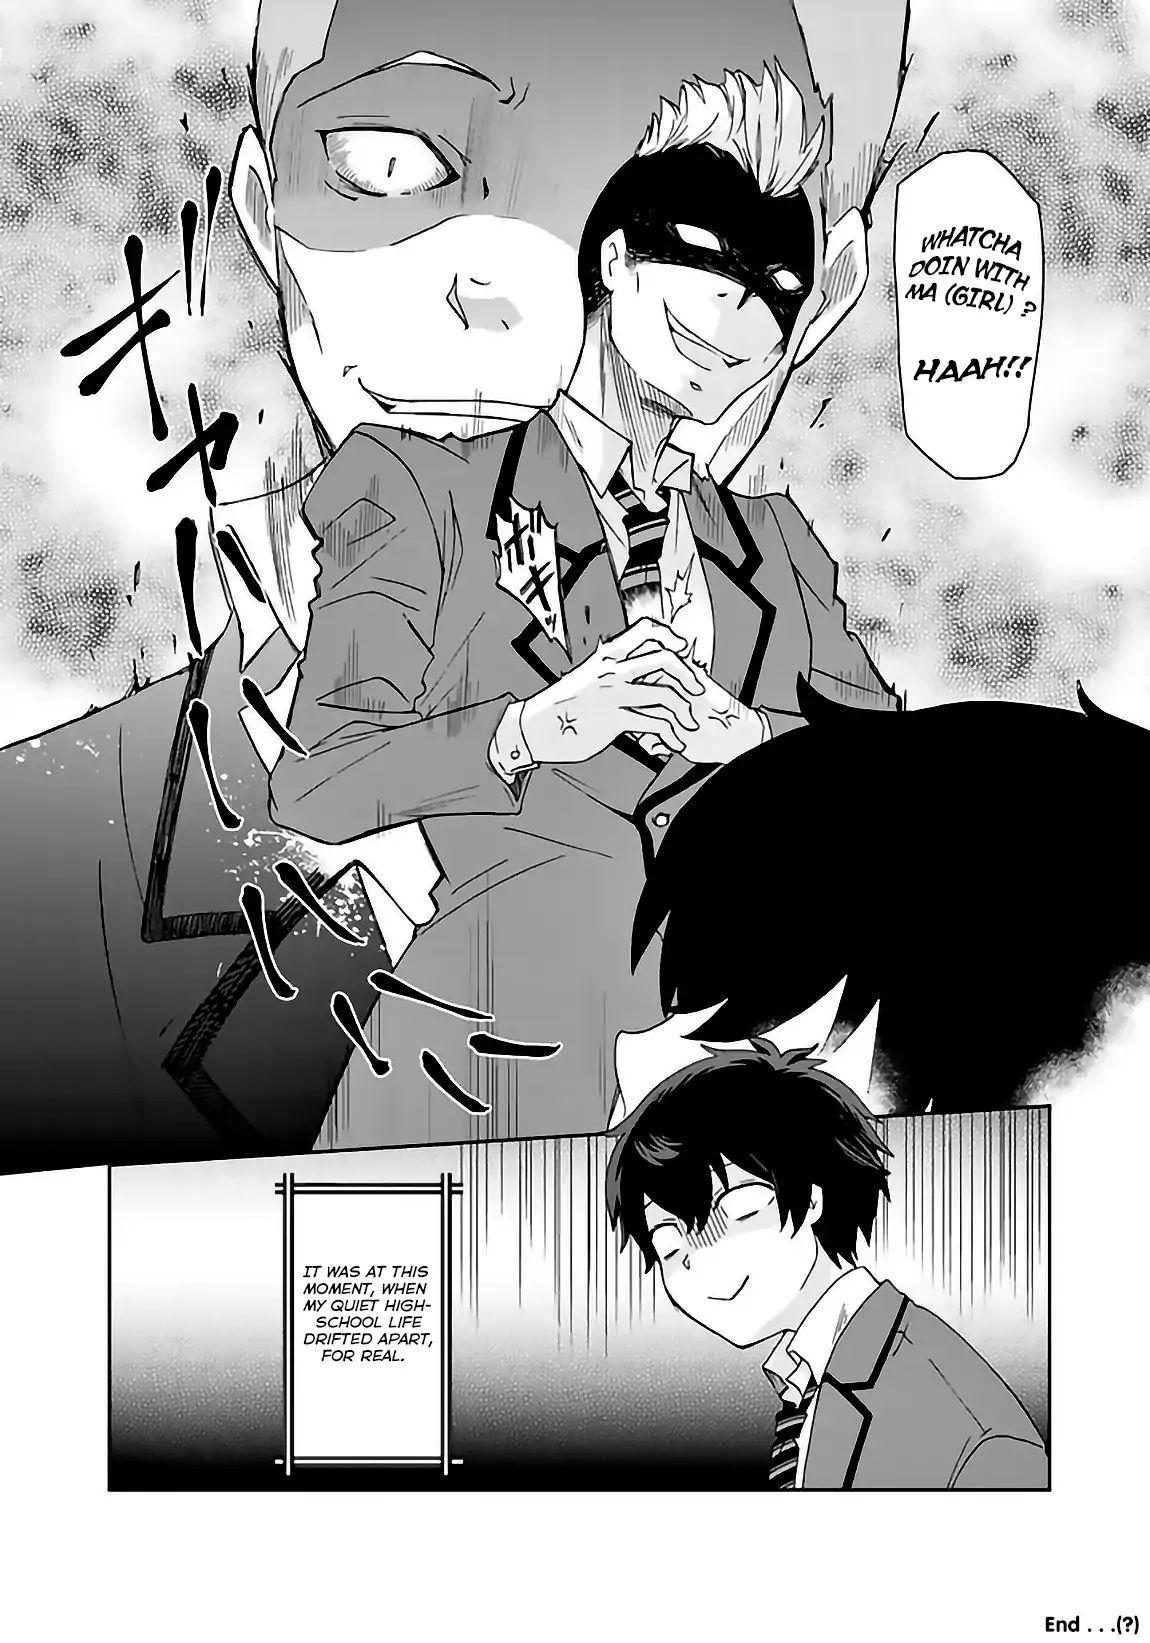 I, Who Possessed A Trash Skill 【Thermal Operator】, Became Unrivaled. Chapter 2.5 #9